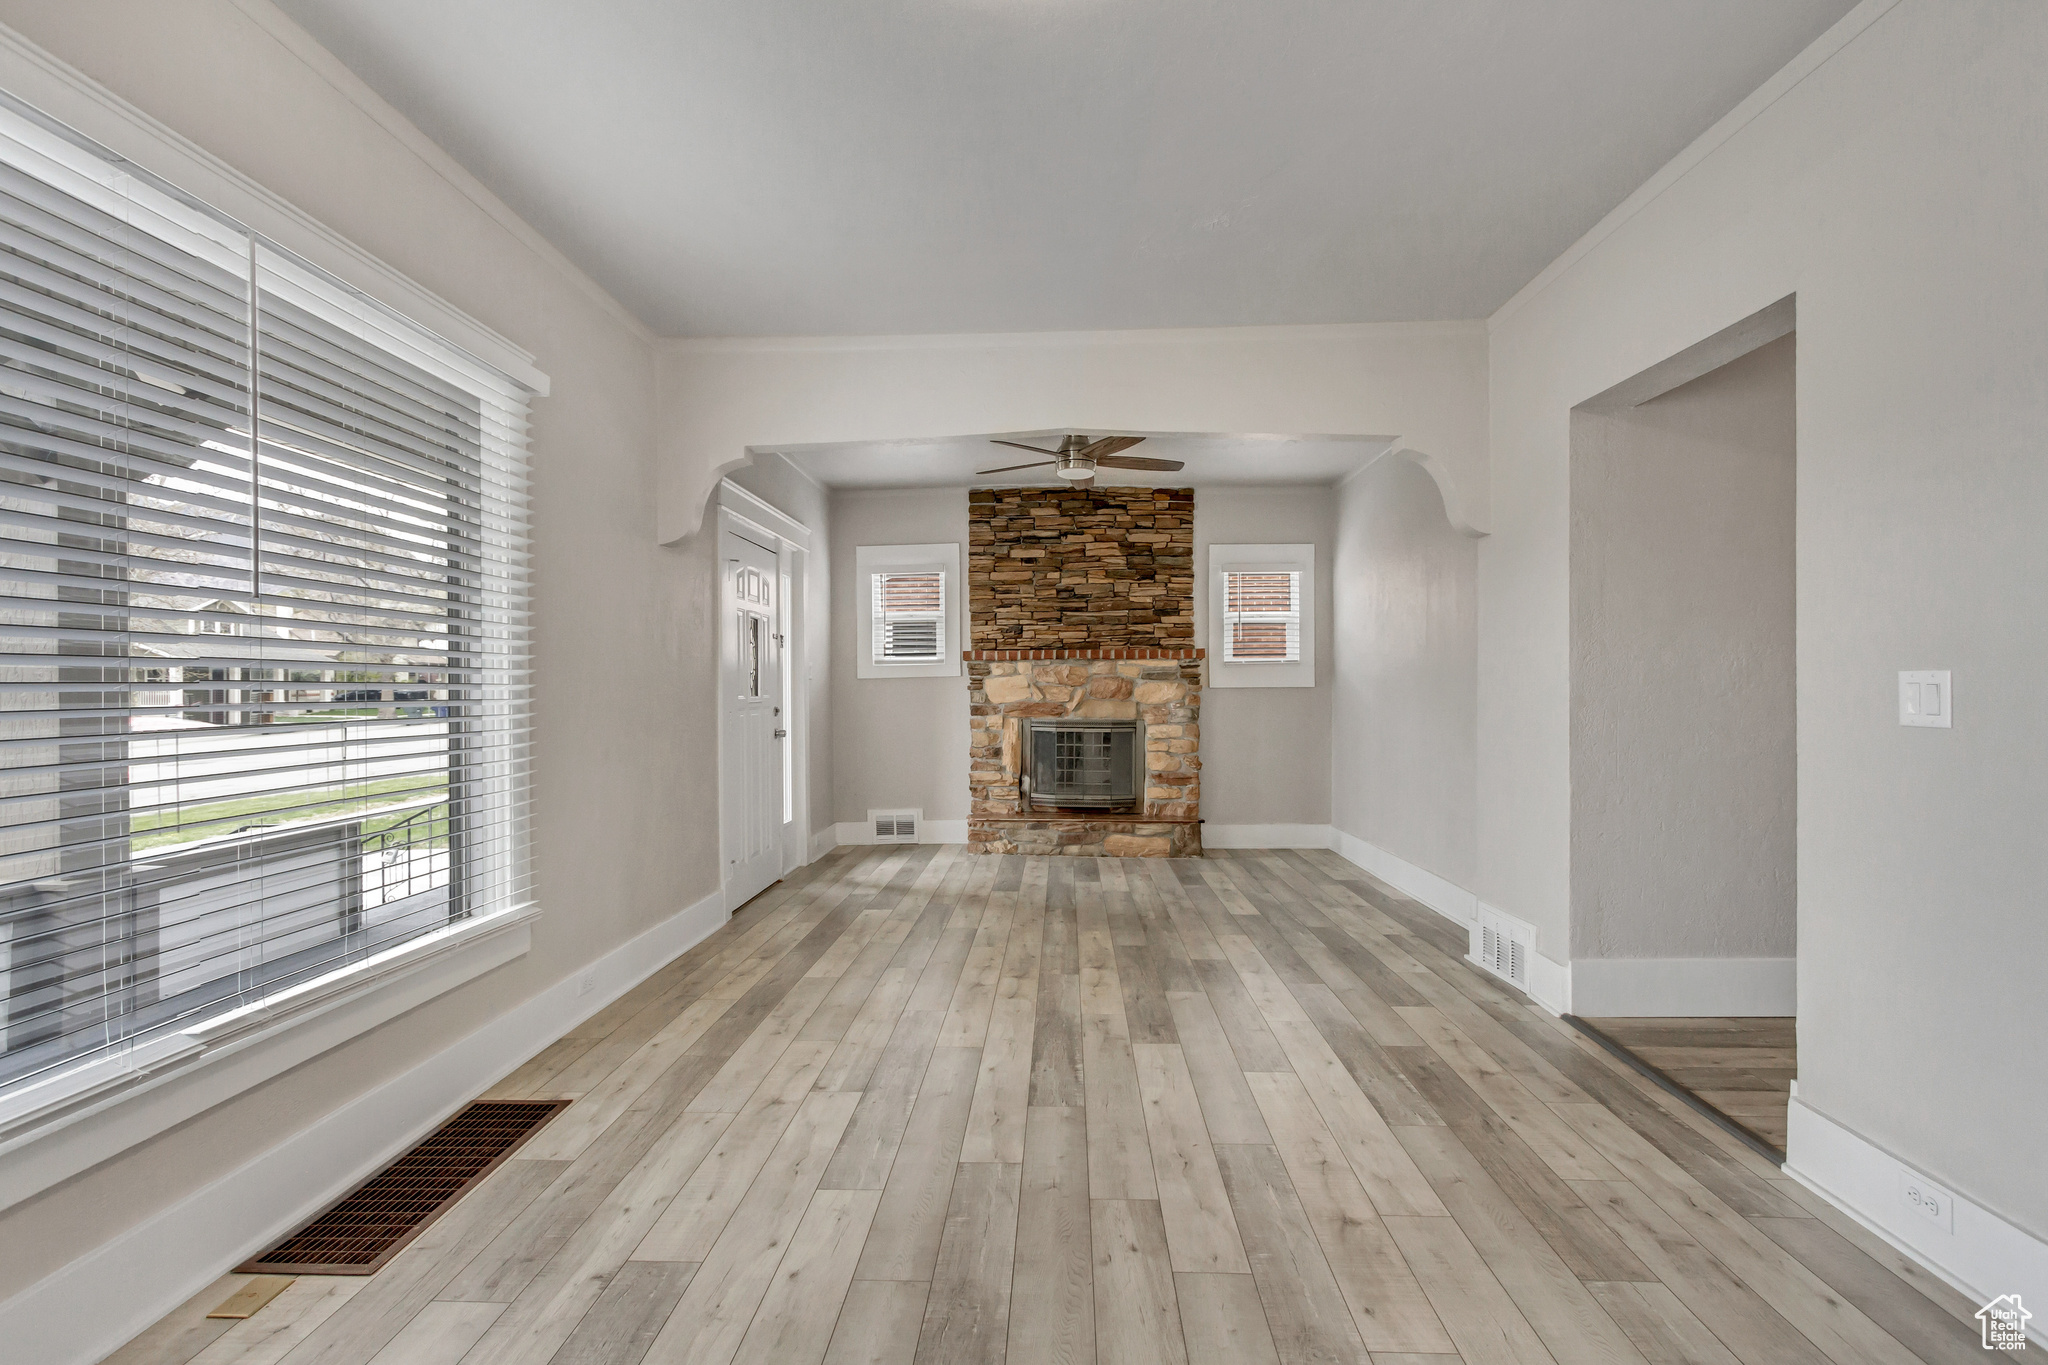 Unfurnished living room with light hardwood / wood-style flooring, ceiling fan, and a stone fireplace